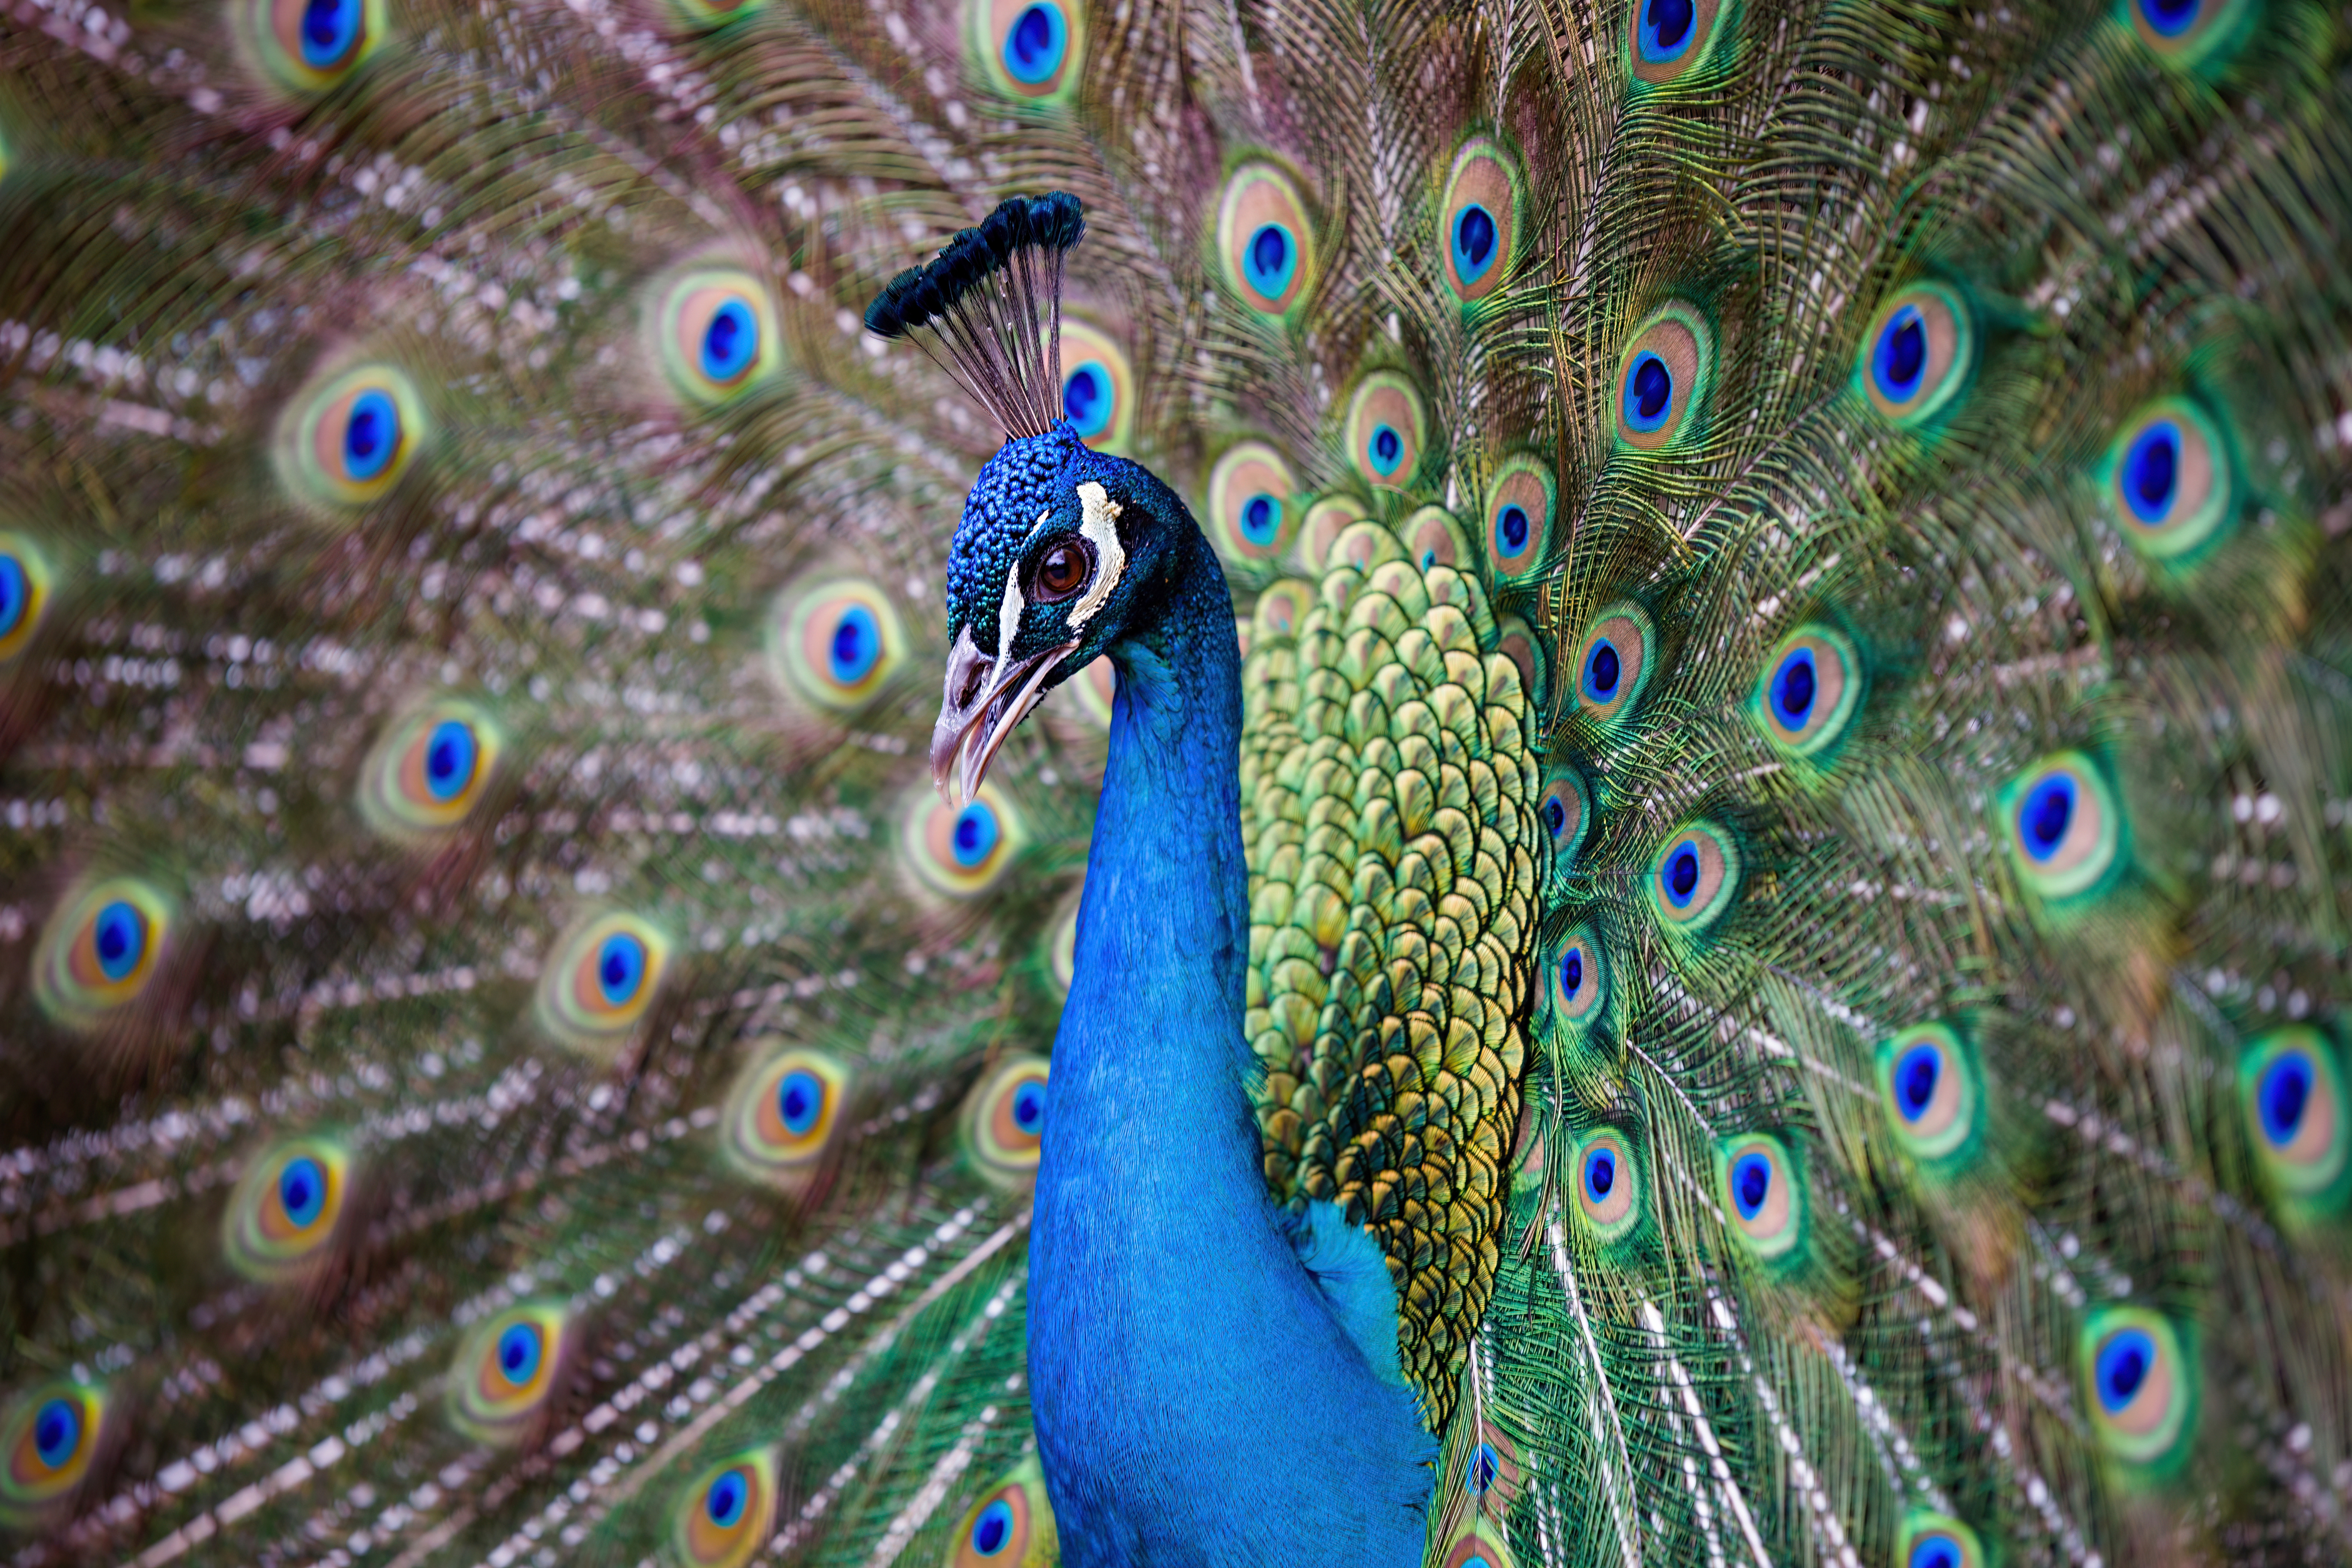 A vibrant peacock with its feathers fully fanned out, showcasing the intricate eye patterns on its tail